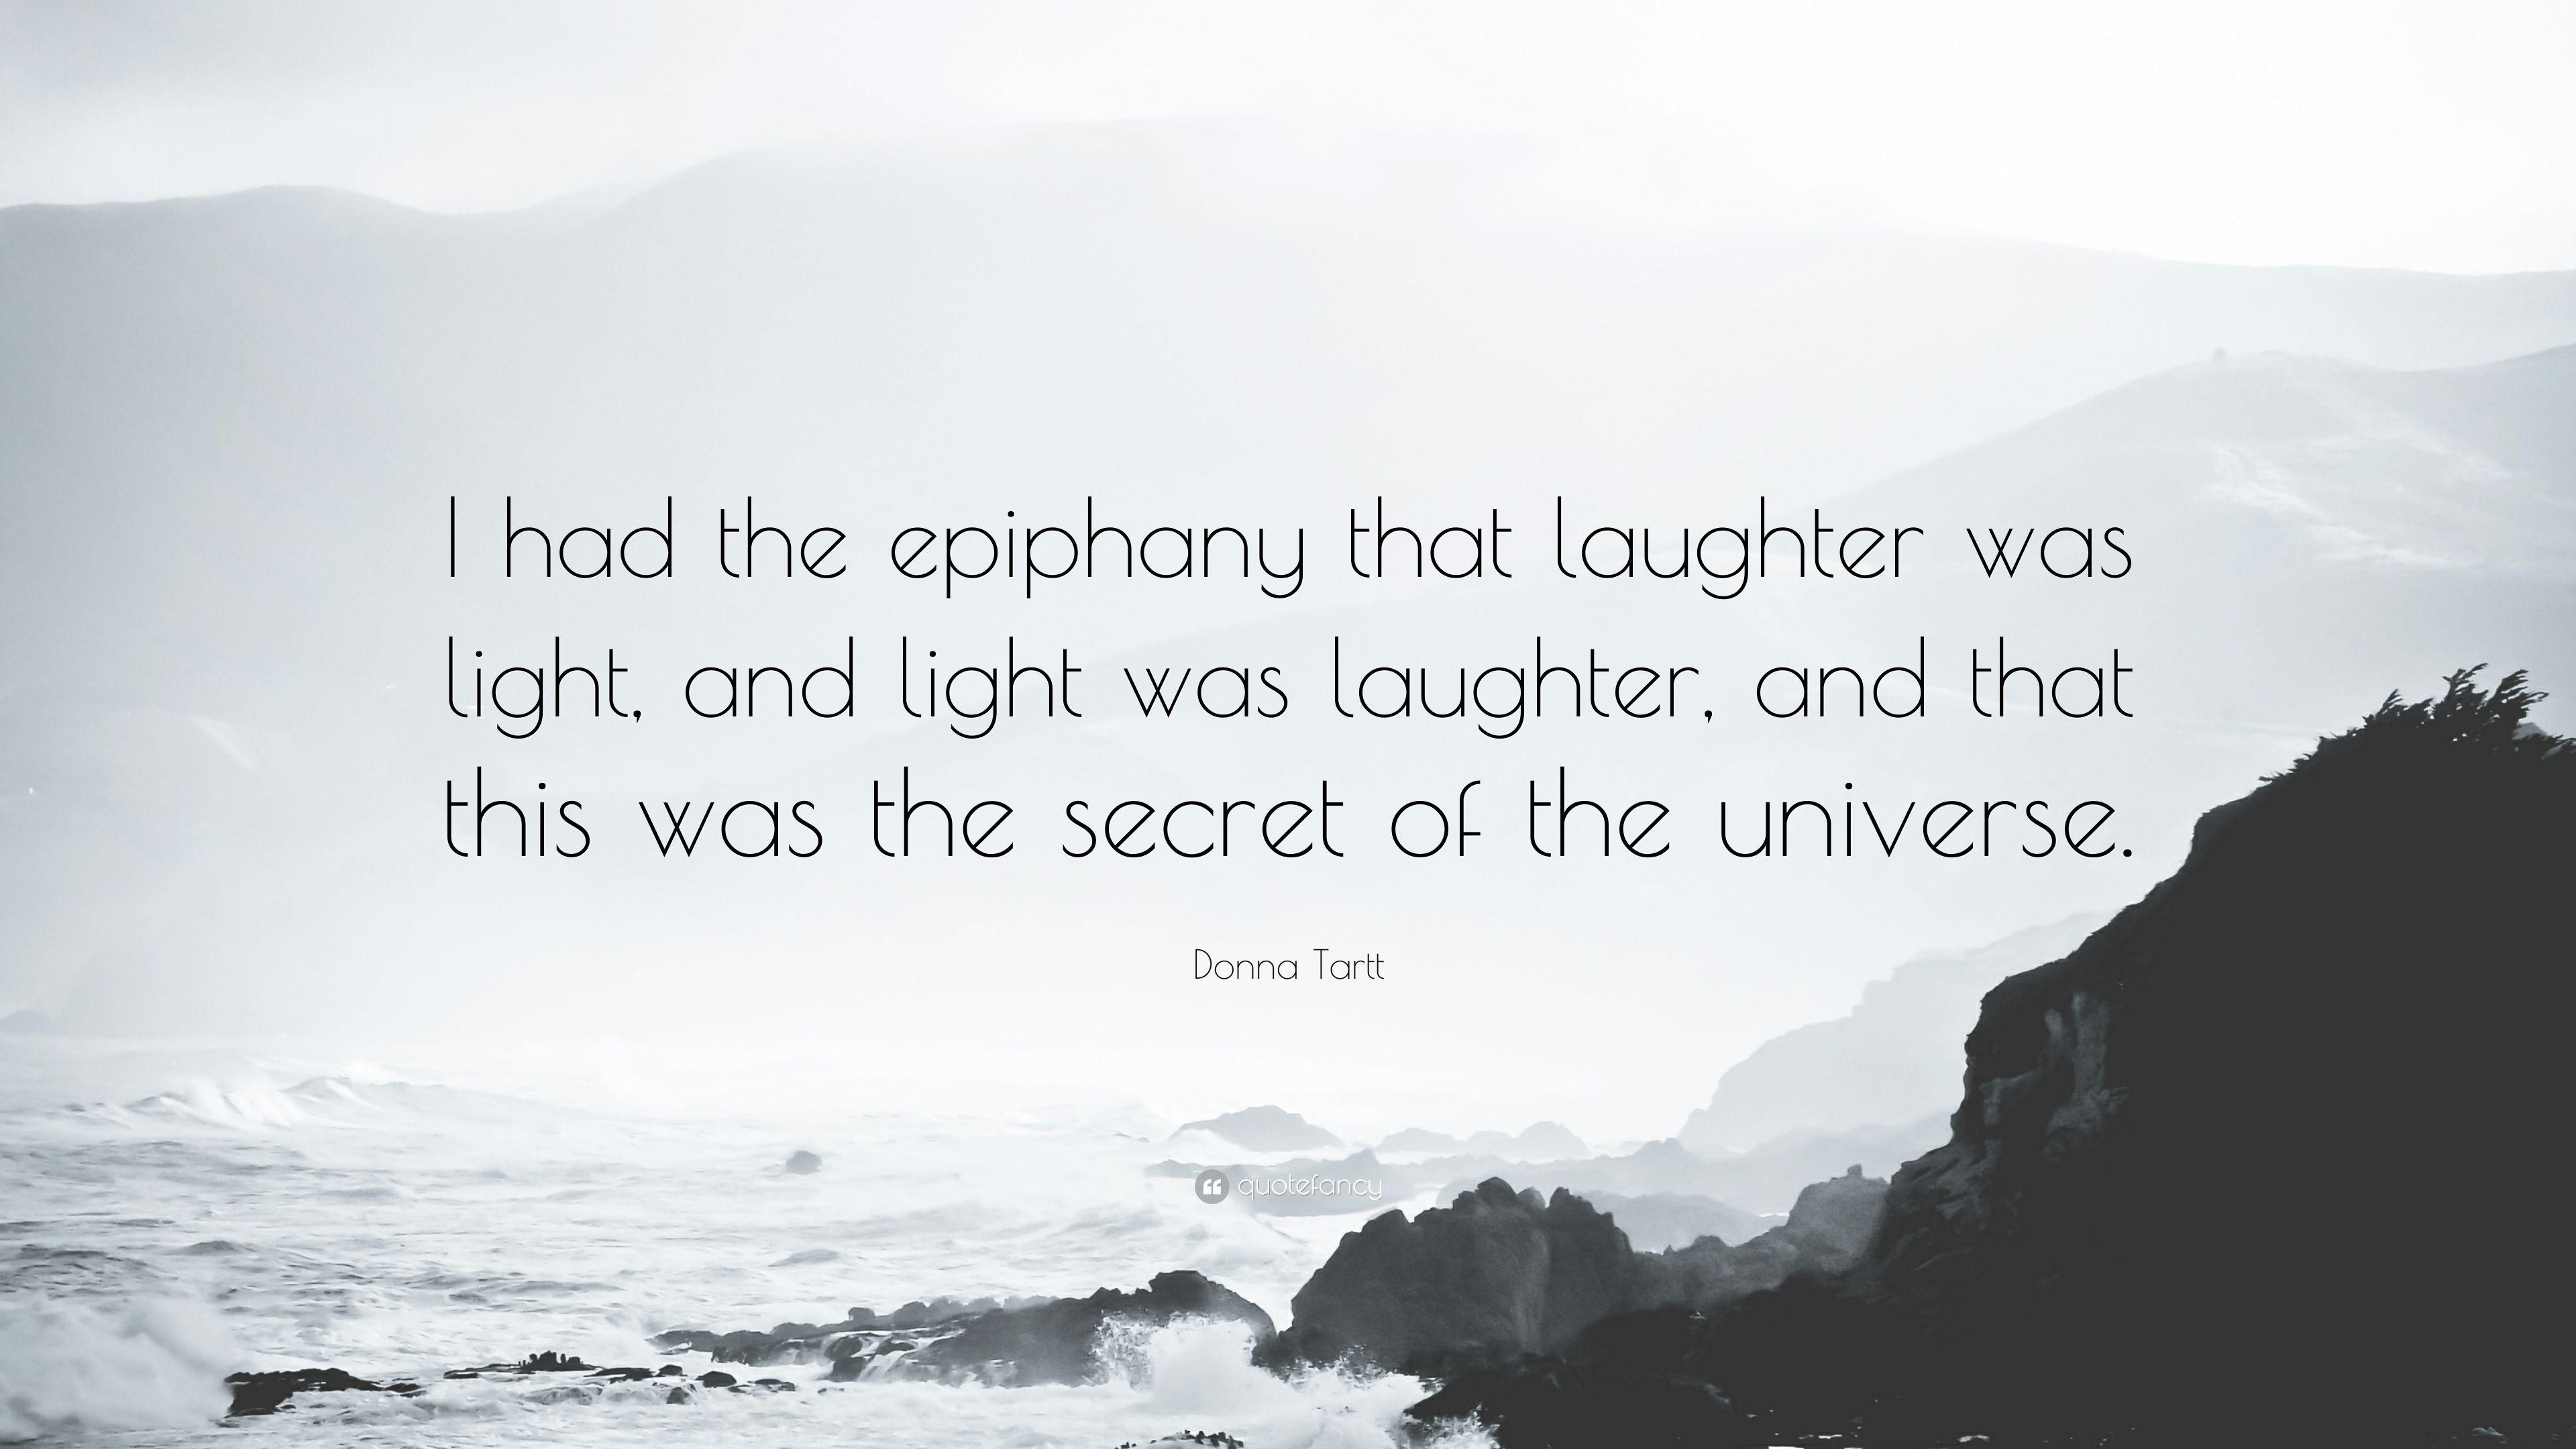 Donna Tartt Quote: “I had the epiphany that laughter was light